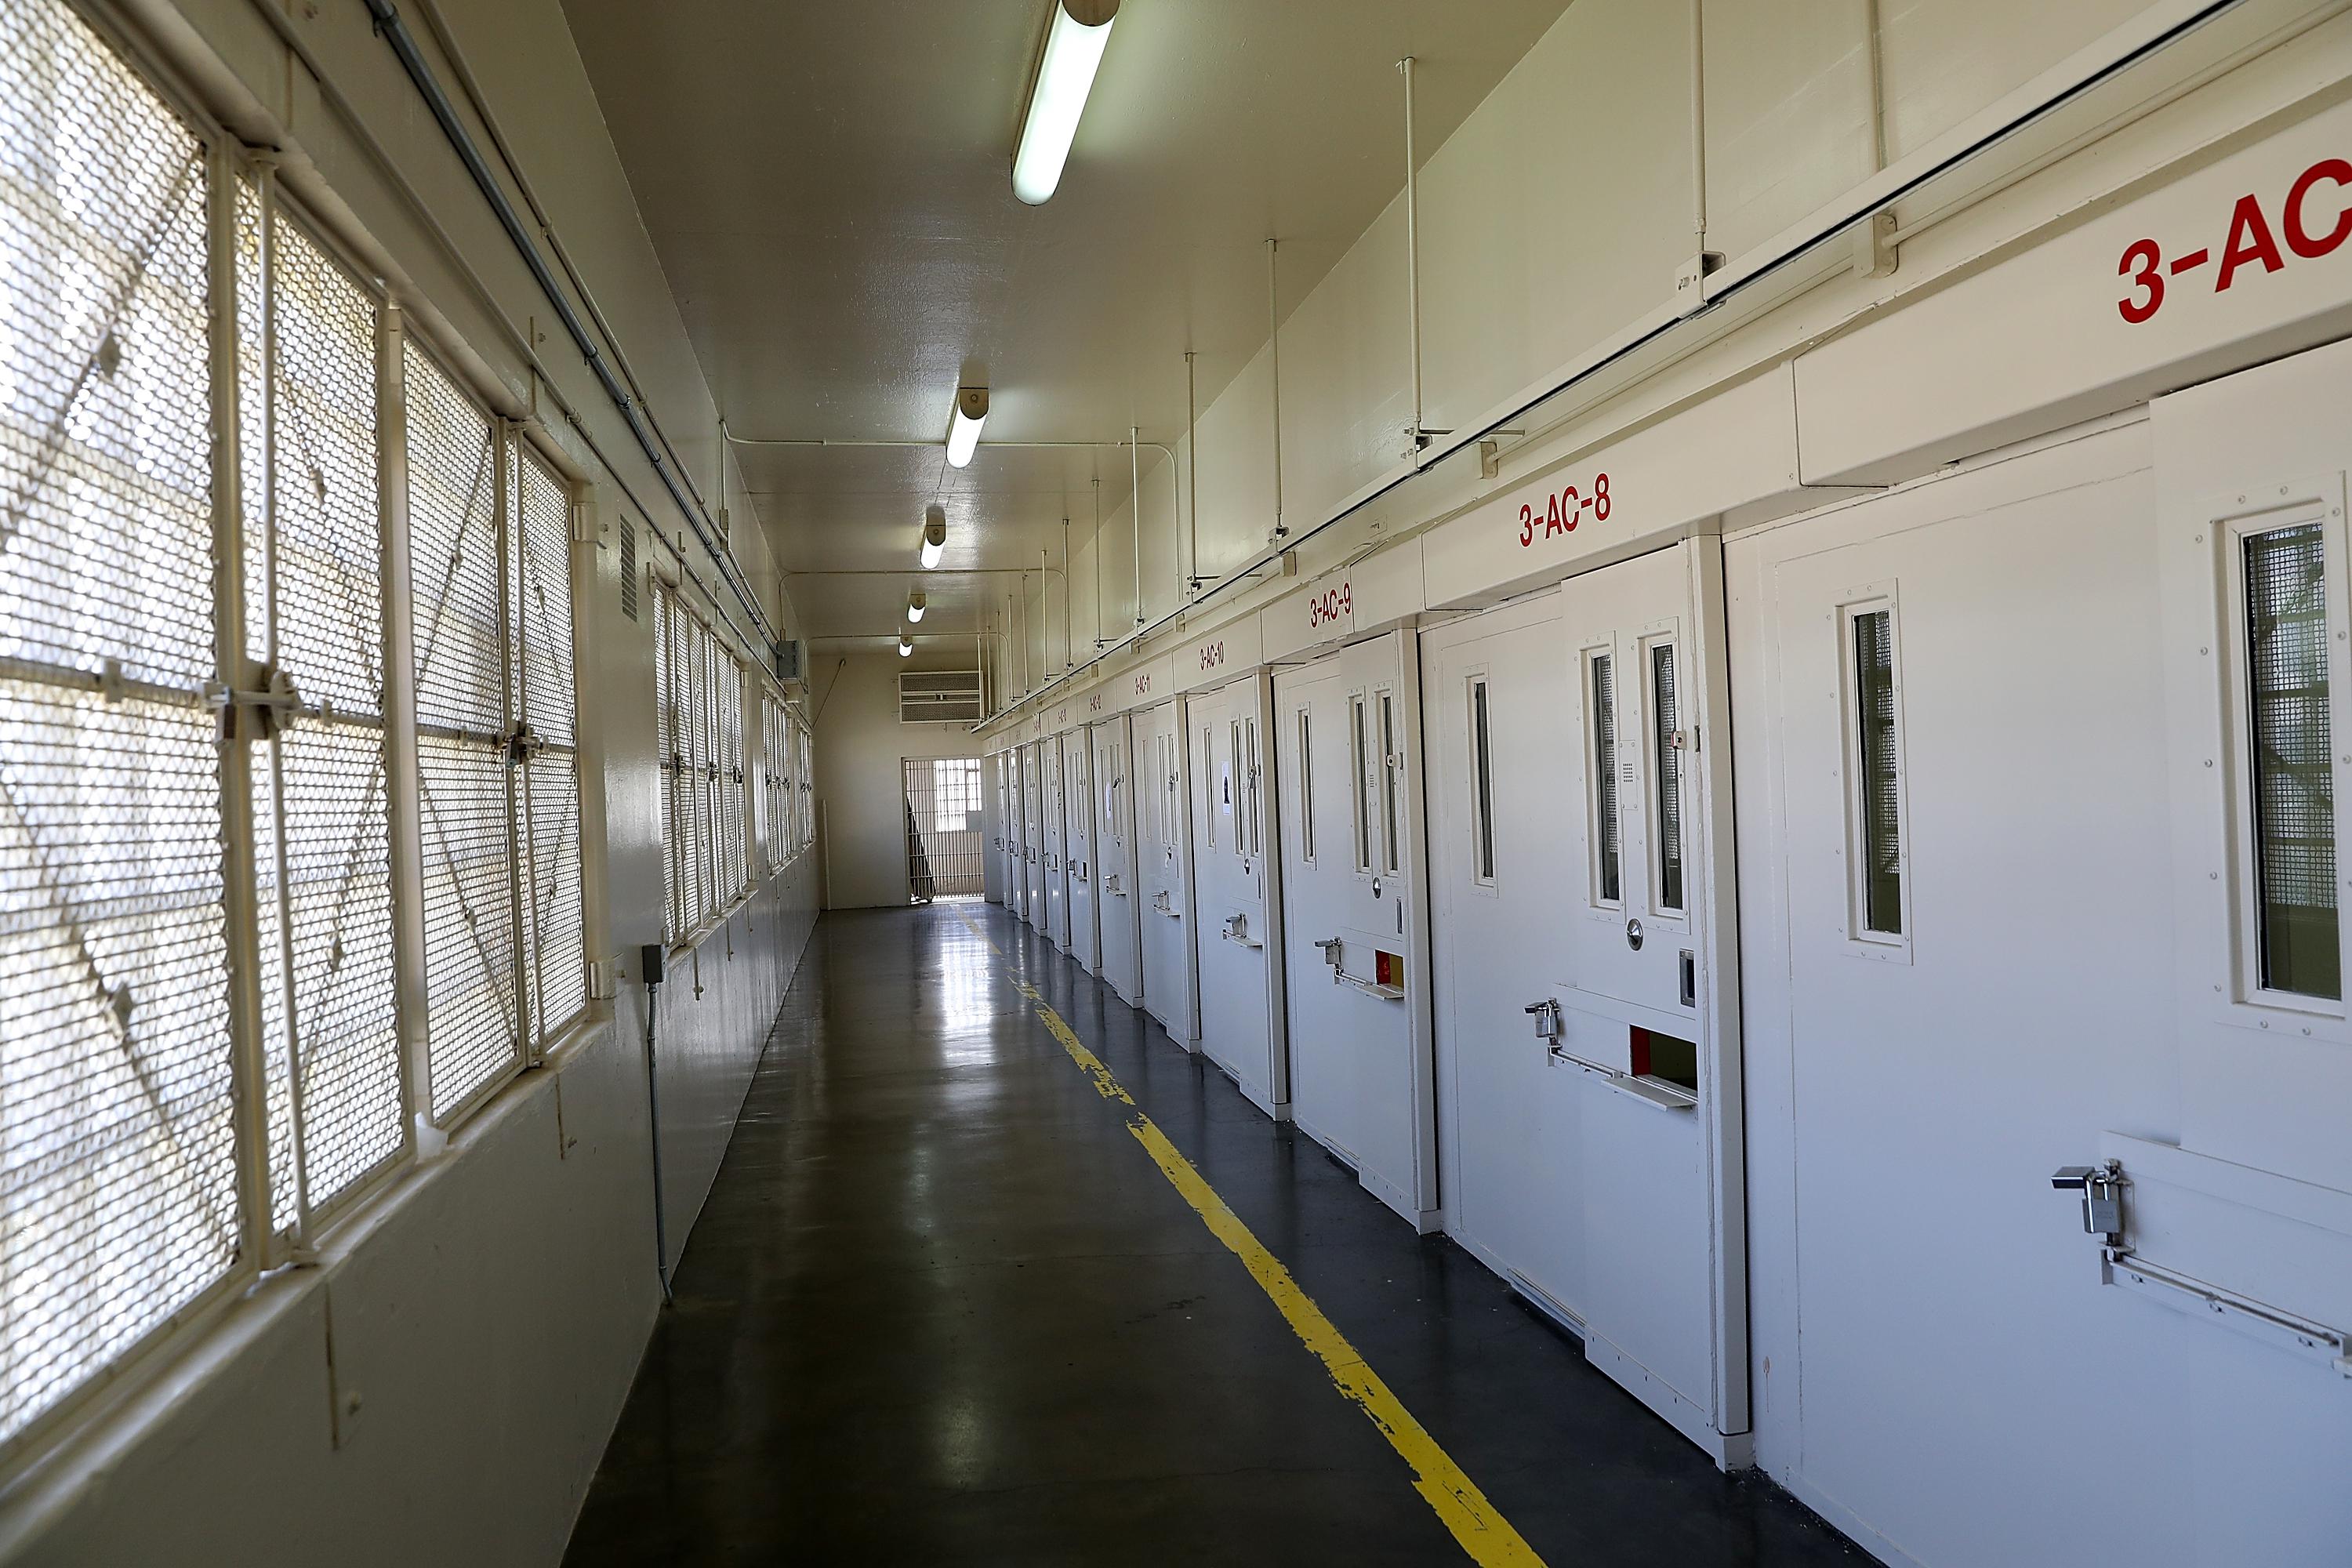 A row of cells doors and a hallway in San Quentin State Prison.